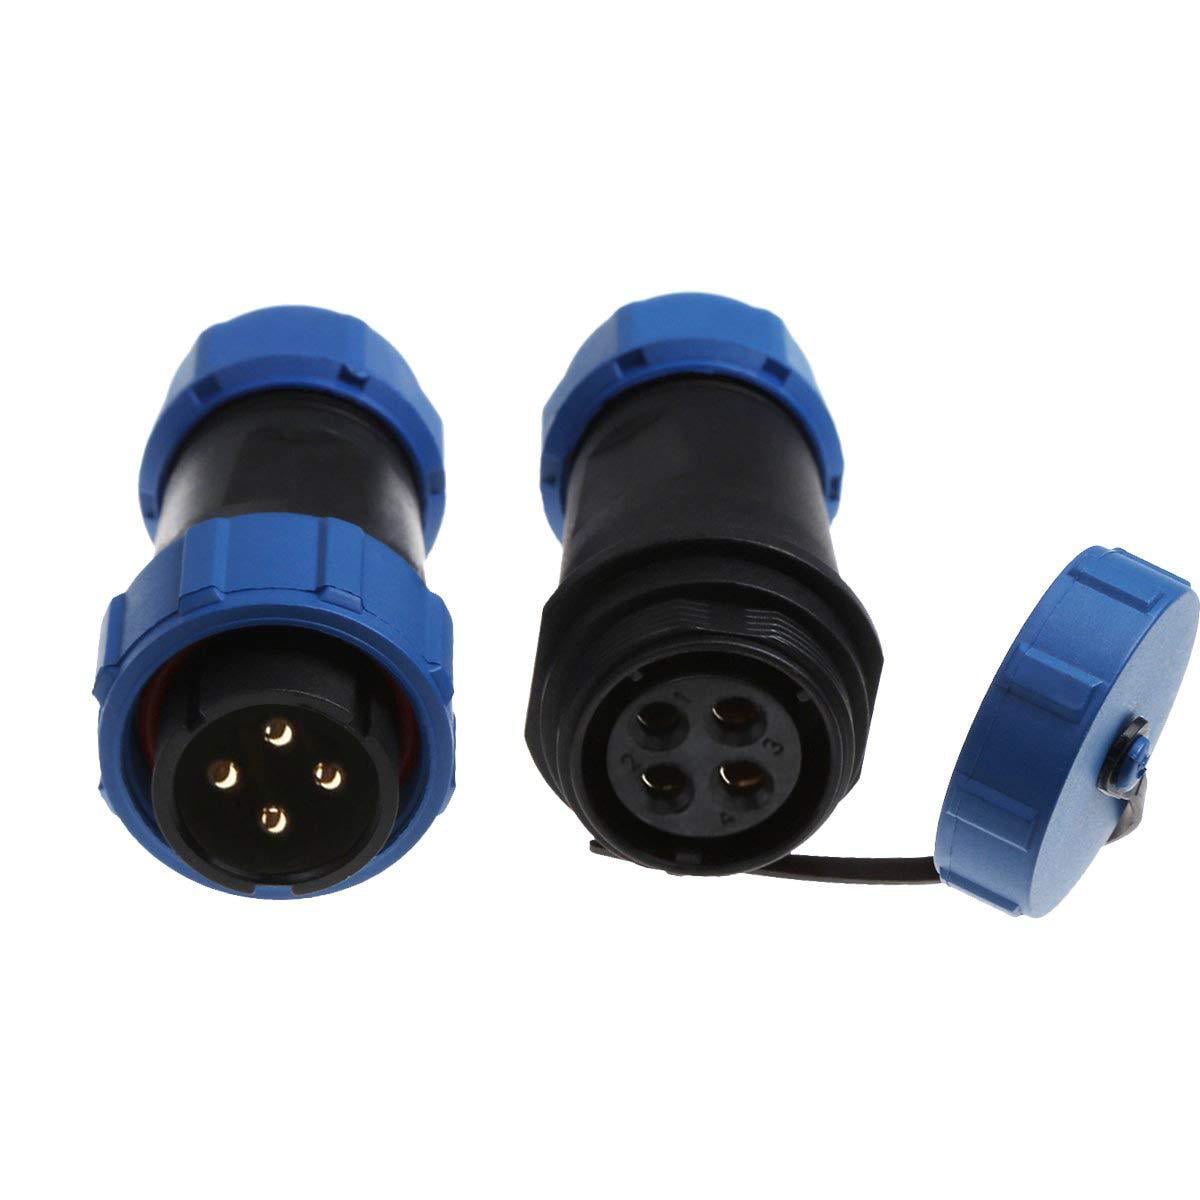 Ideapro Pair Waterproof Aviation Cable Connector Socket SP21-12 12 Pin IP68 